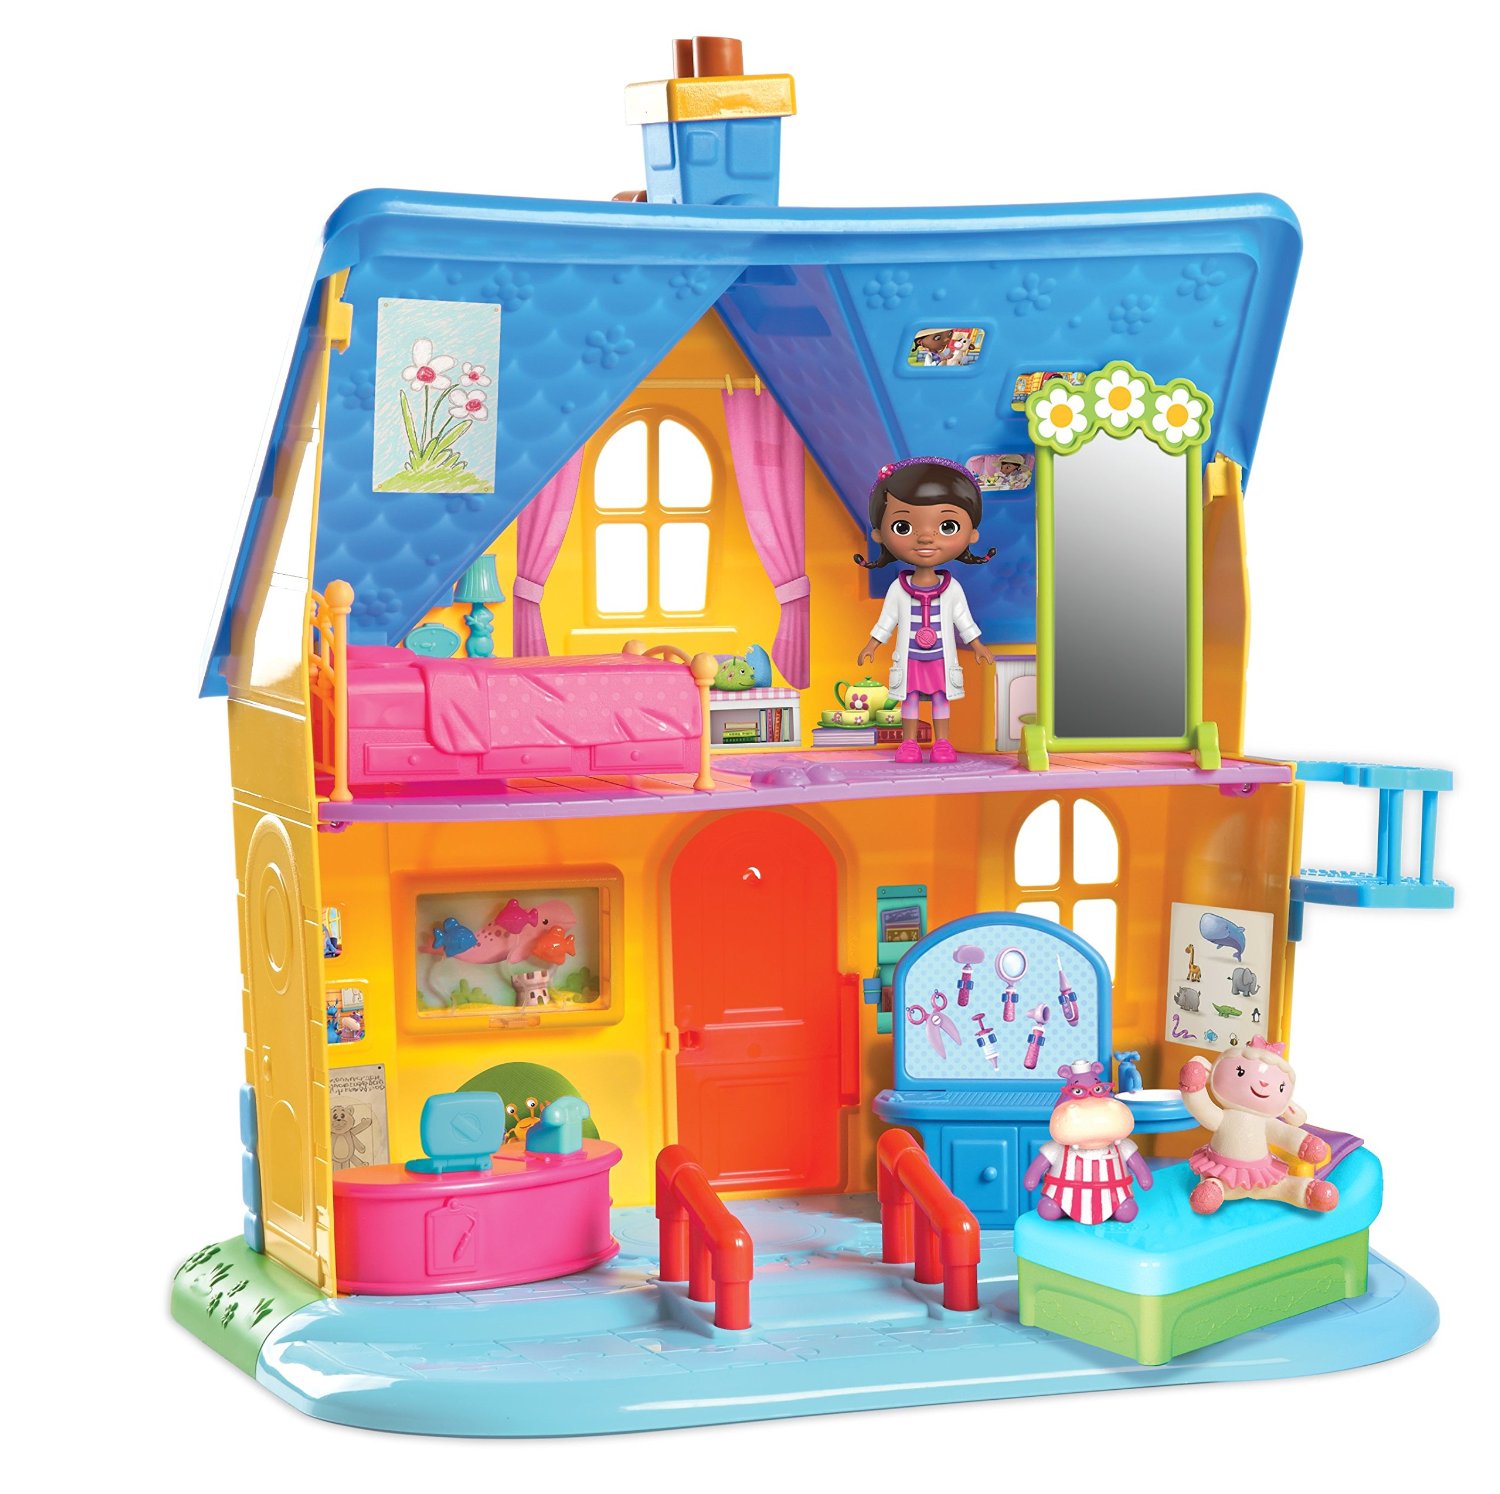 Doc McStuffins Clinic Doll House with Doll Only $29.99 – Reg $49.99